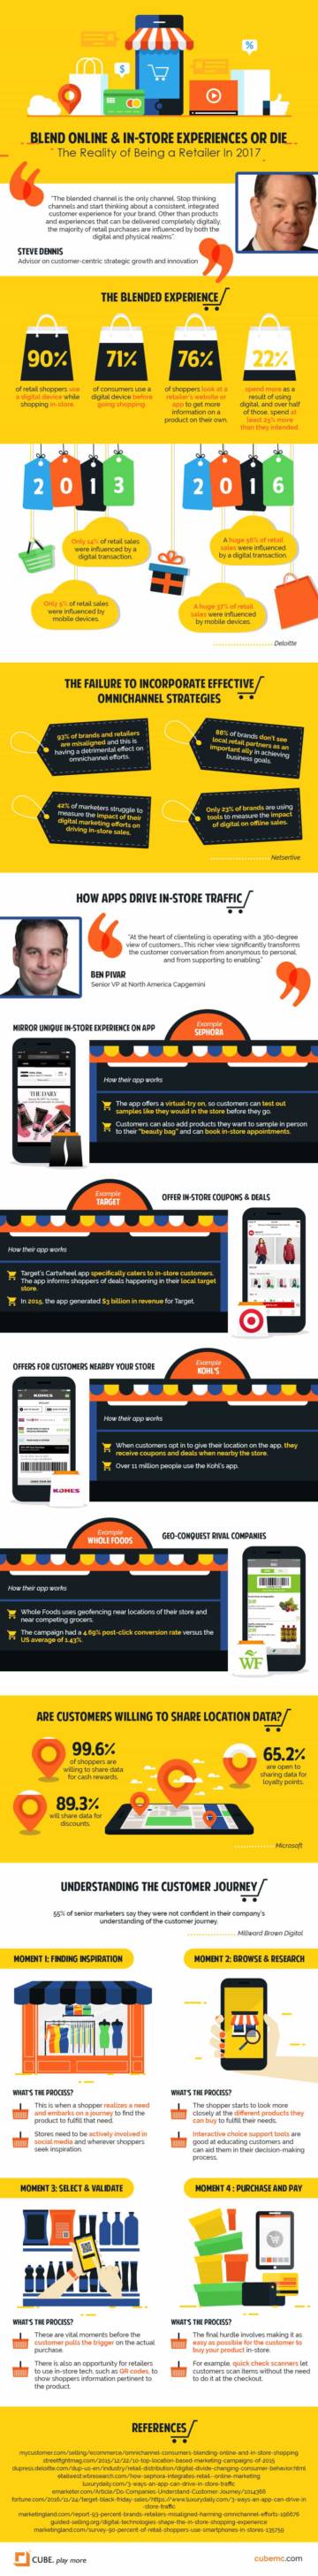 this infographic shows retailers how to make use of the opportunities provided by modern technology to increase sales and customer engagement